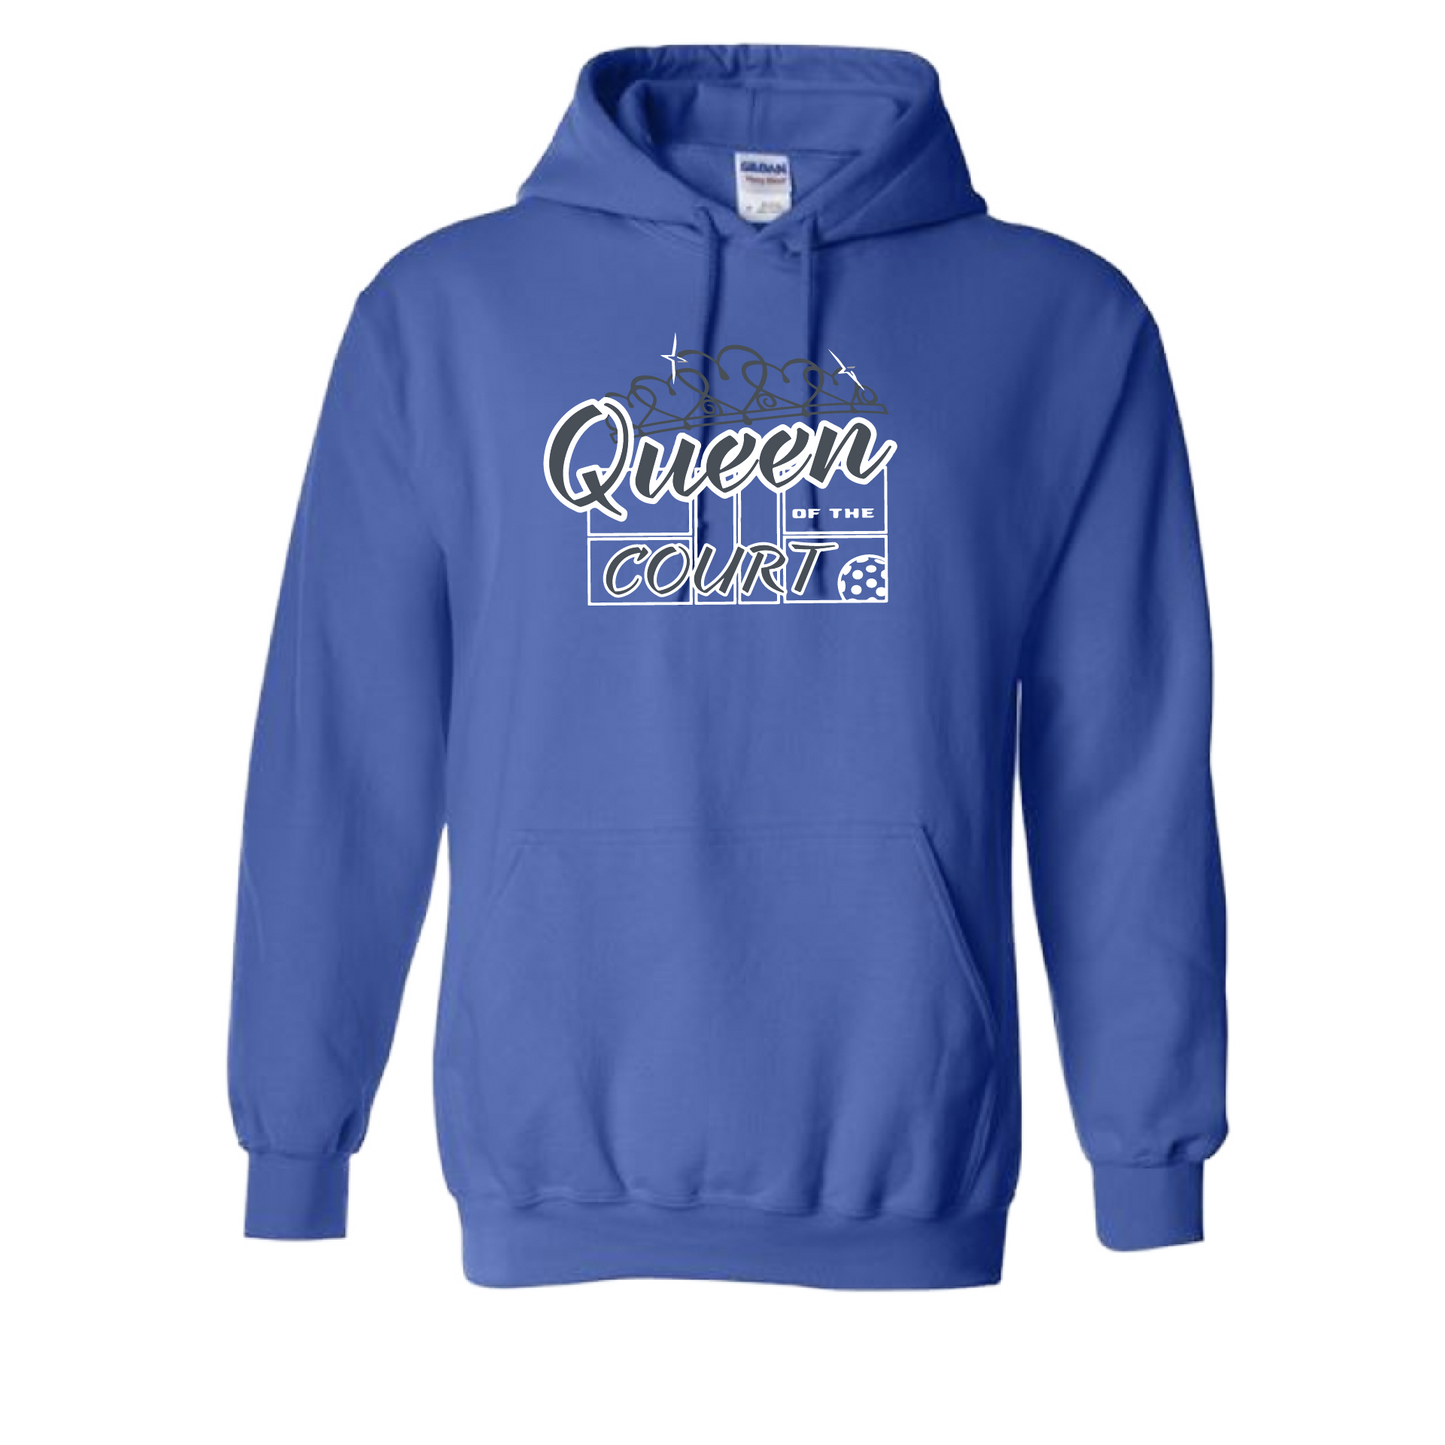 Pickleball Design: Queen of the Court  Unisex Hooded Sweatshirt:  Moisture-wicking, double-lined hood, front pouch pocket.  This unisex hooded sweatshirt is ultra comfortable and soft. Stay warm on the Pickleball courts while being that hit with this one of kind design.